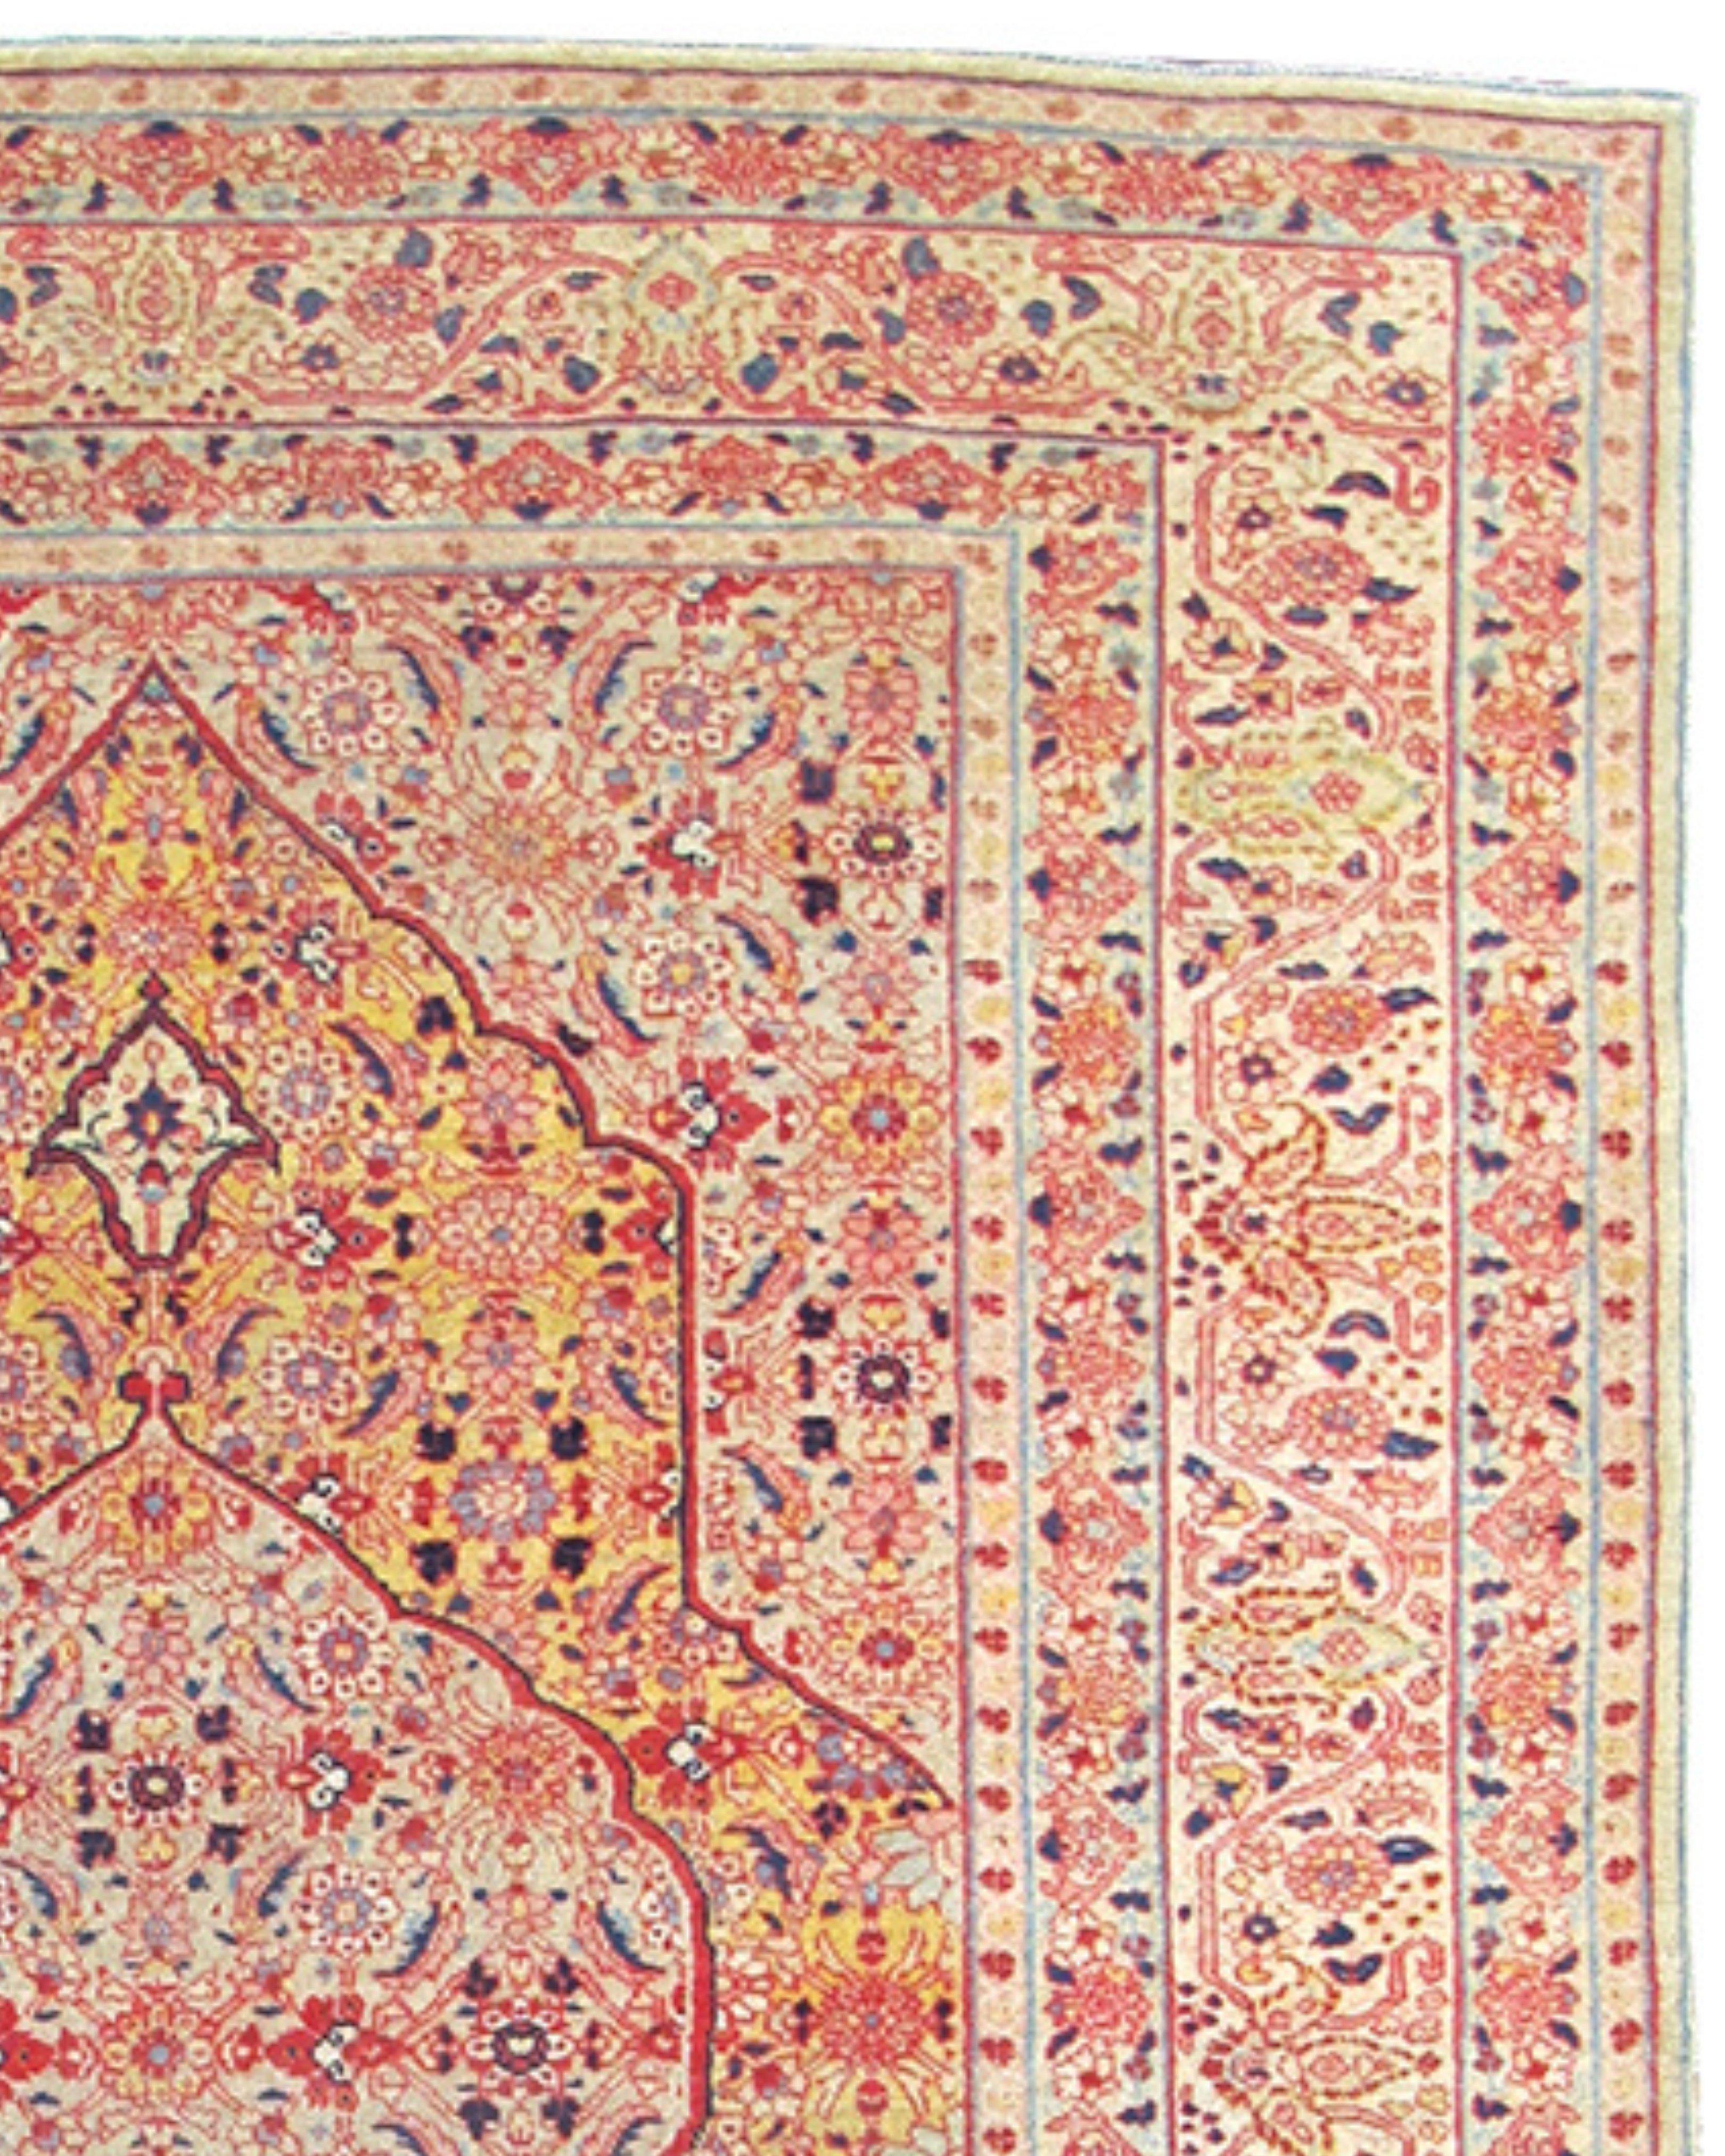 Tabriz Rug, c. 1900

Tabriz carpets have come almost to define antique Persian rugs in the minds of many. This piece combines a refinement of design with a sophistication of drawing and subtle use of color. The classic central medallion is flanked